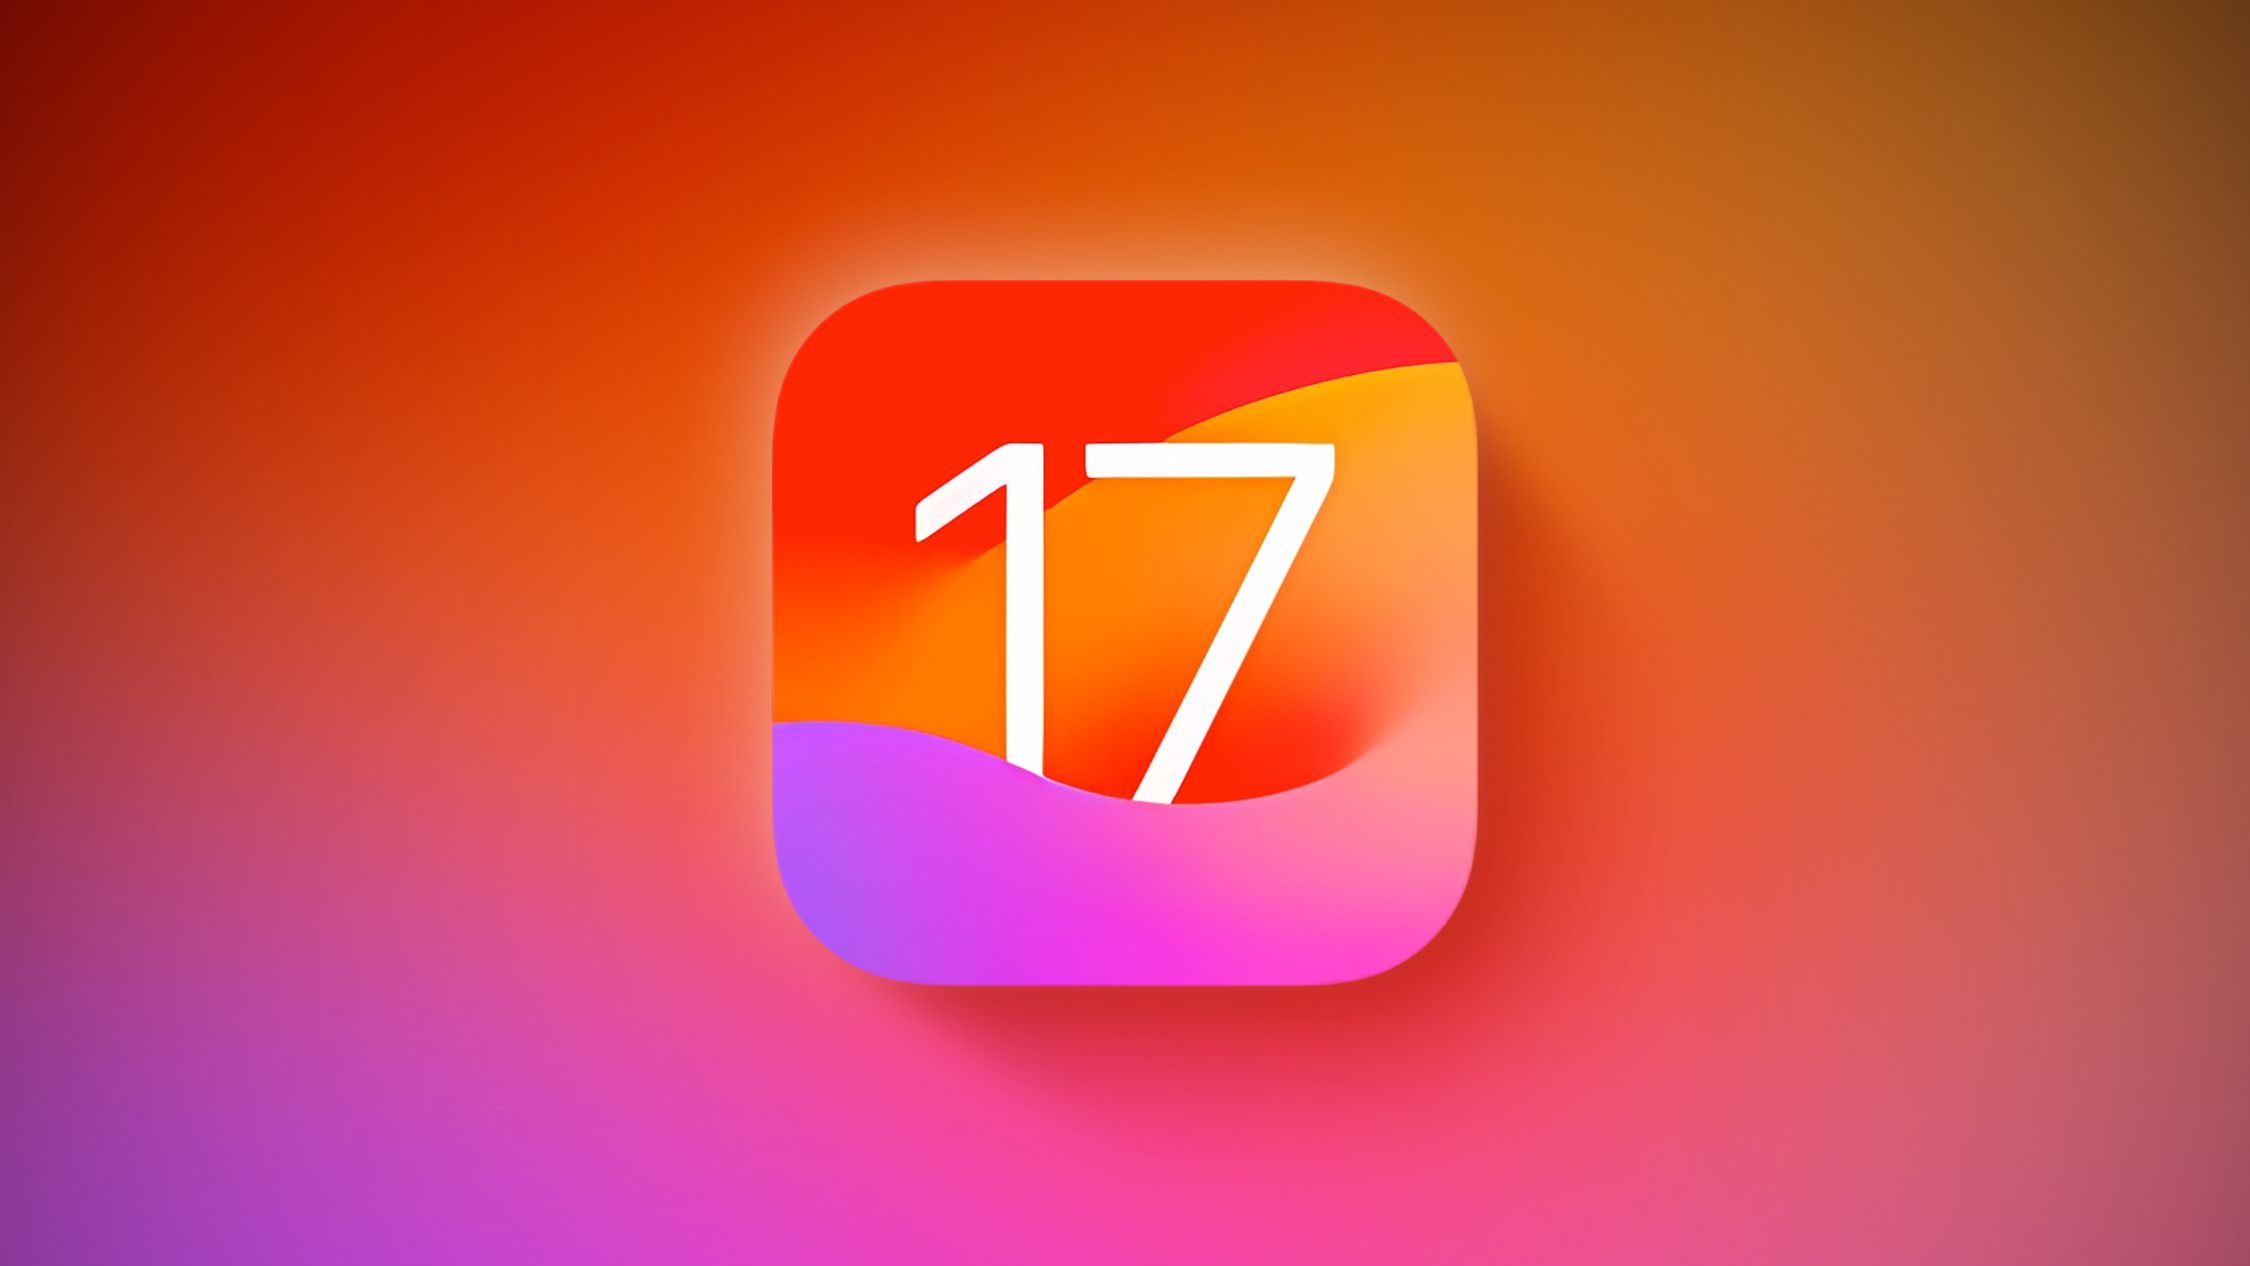 iOS 17 will launch tomorrow for iPhone with these 10 new features